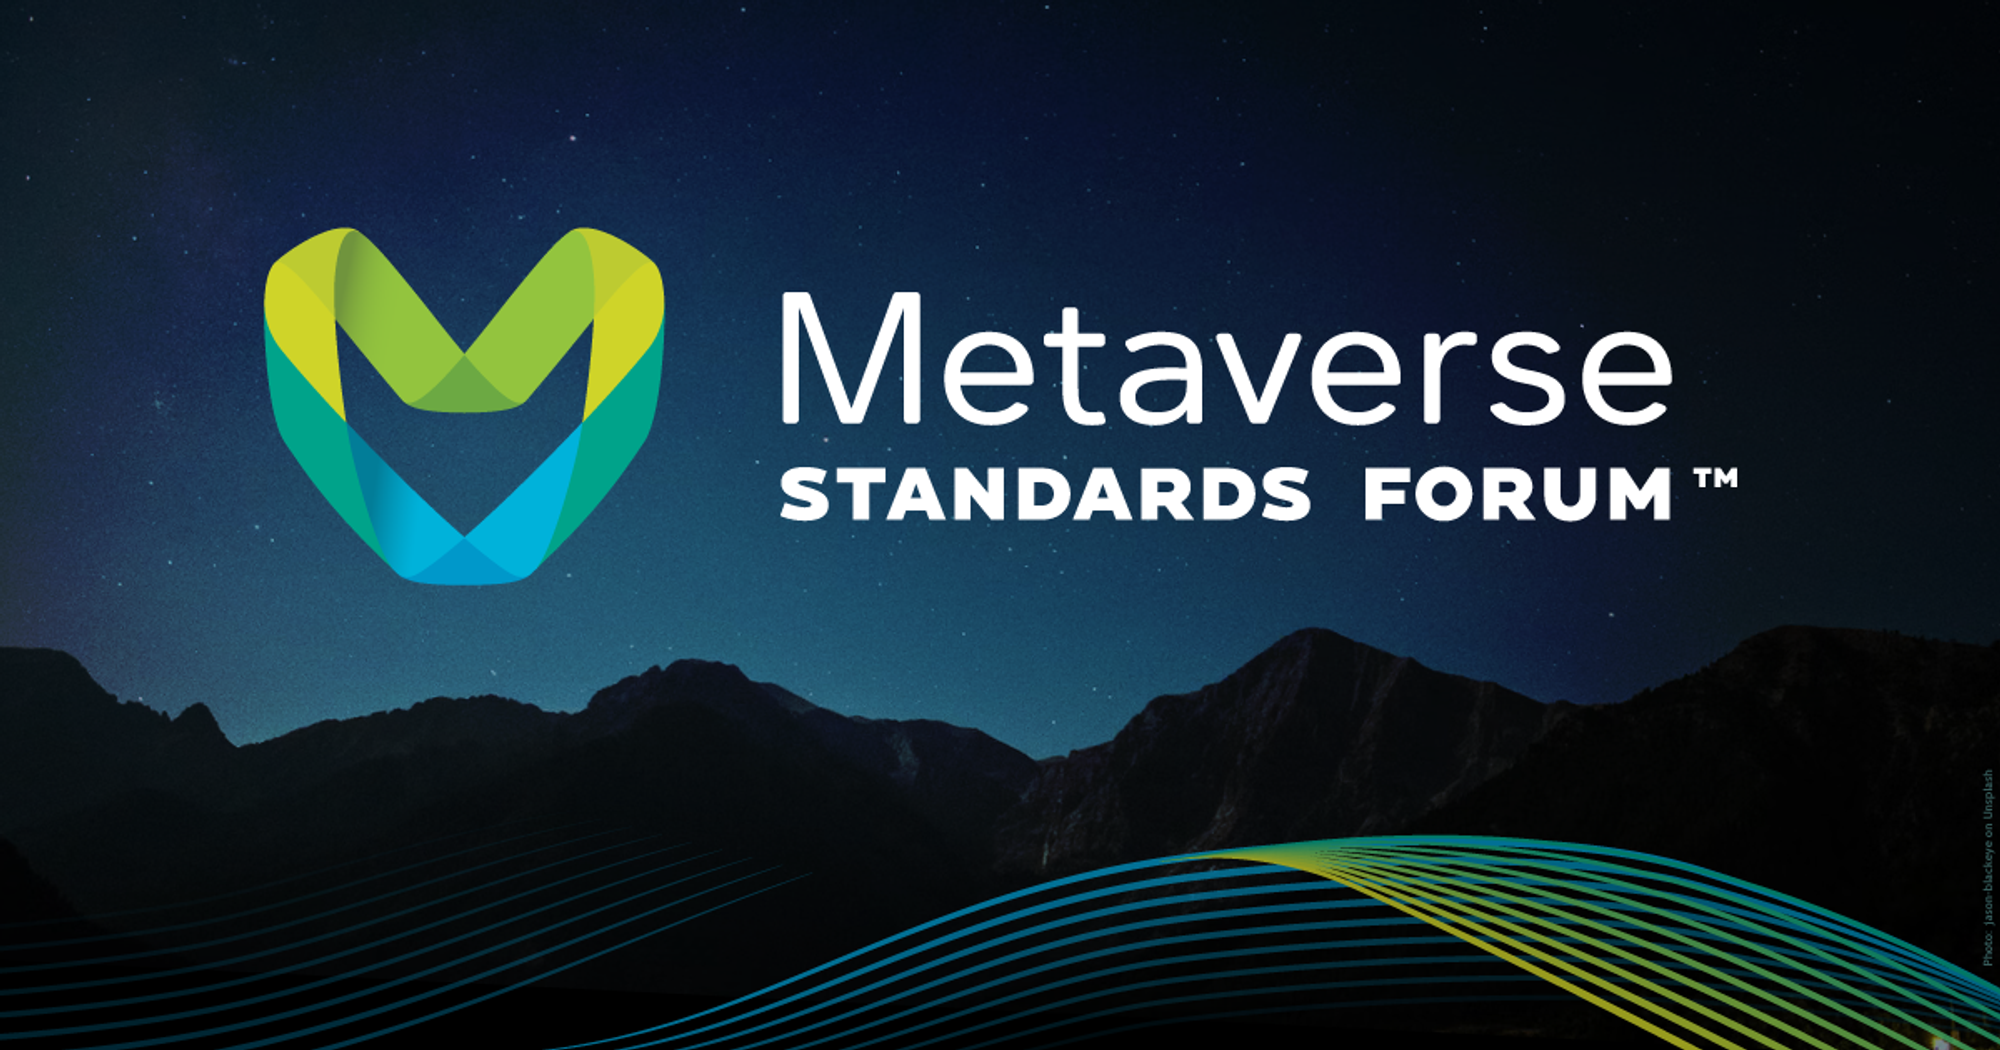 Leading Standards Organizations and Companies Unite to Drive Open Metaverse Interoperability - Metaverse Standards Forum